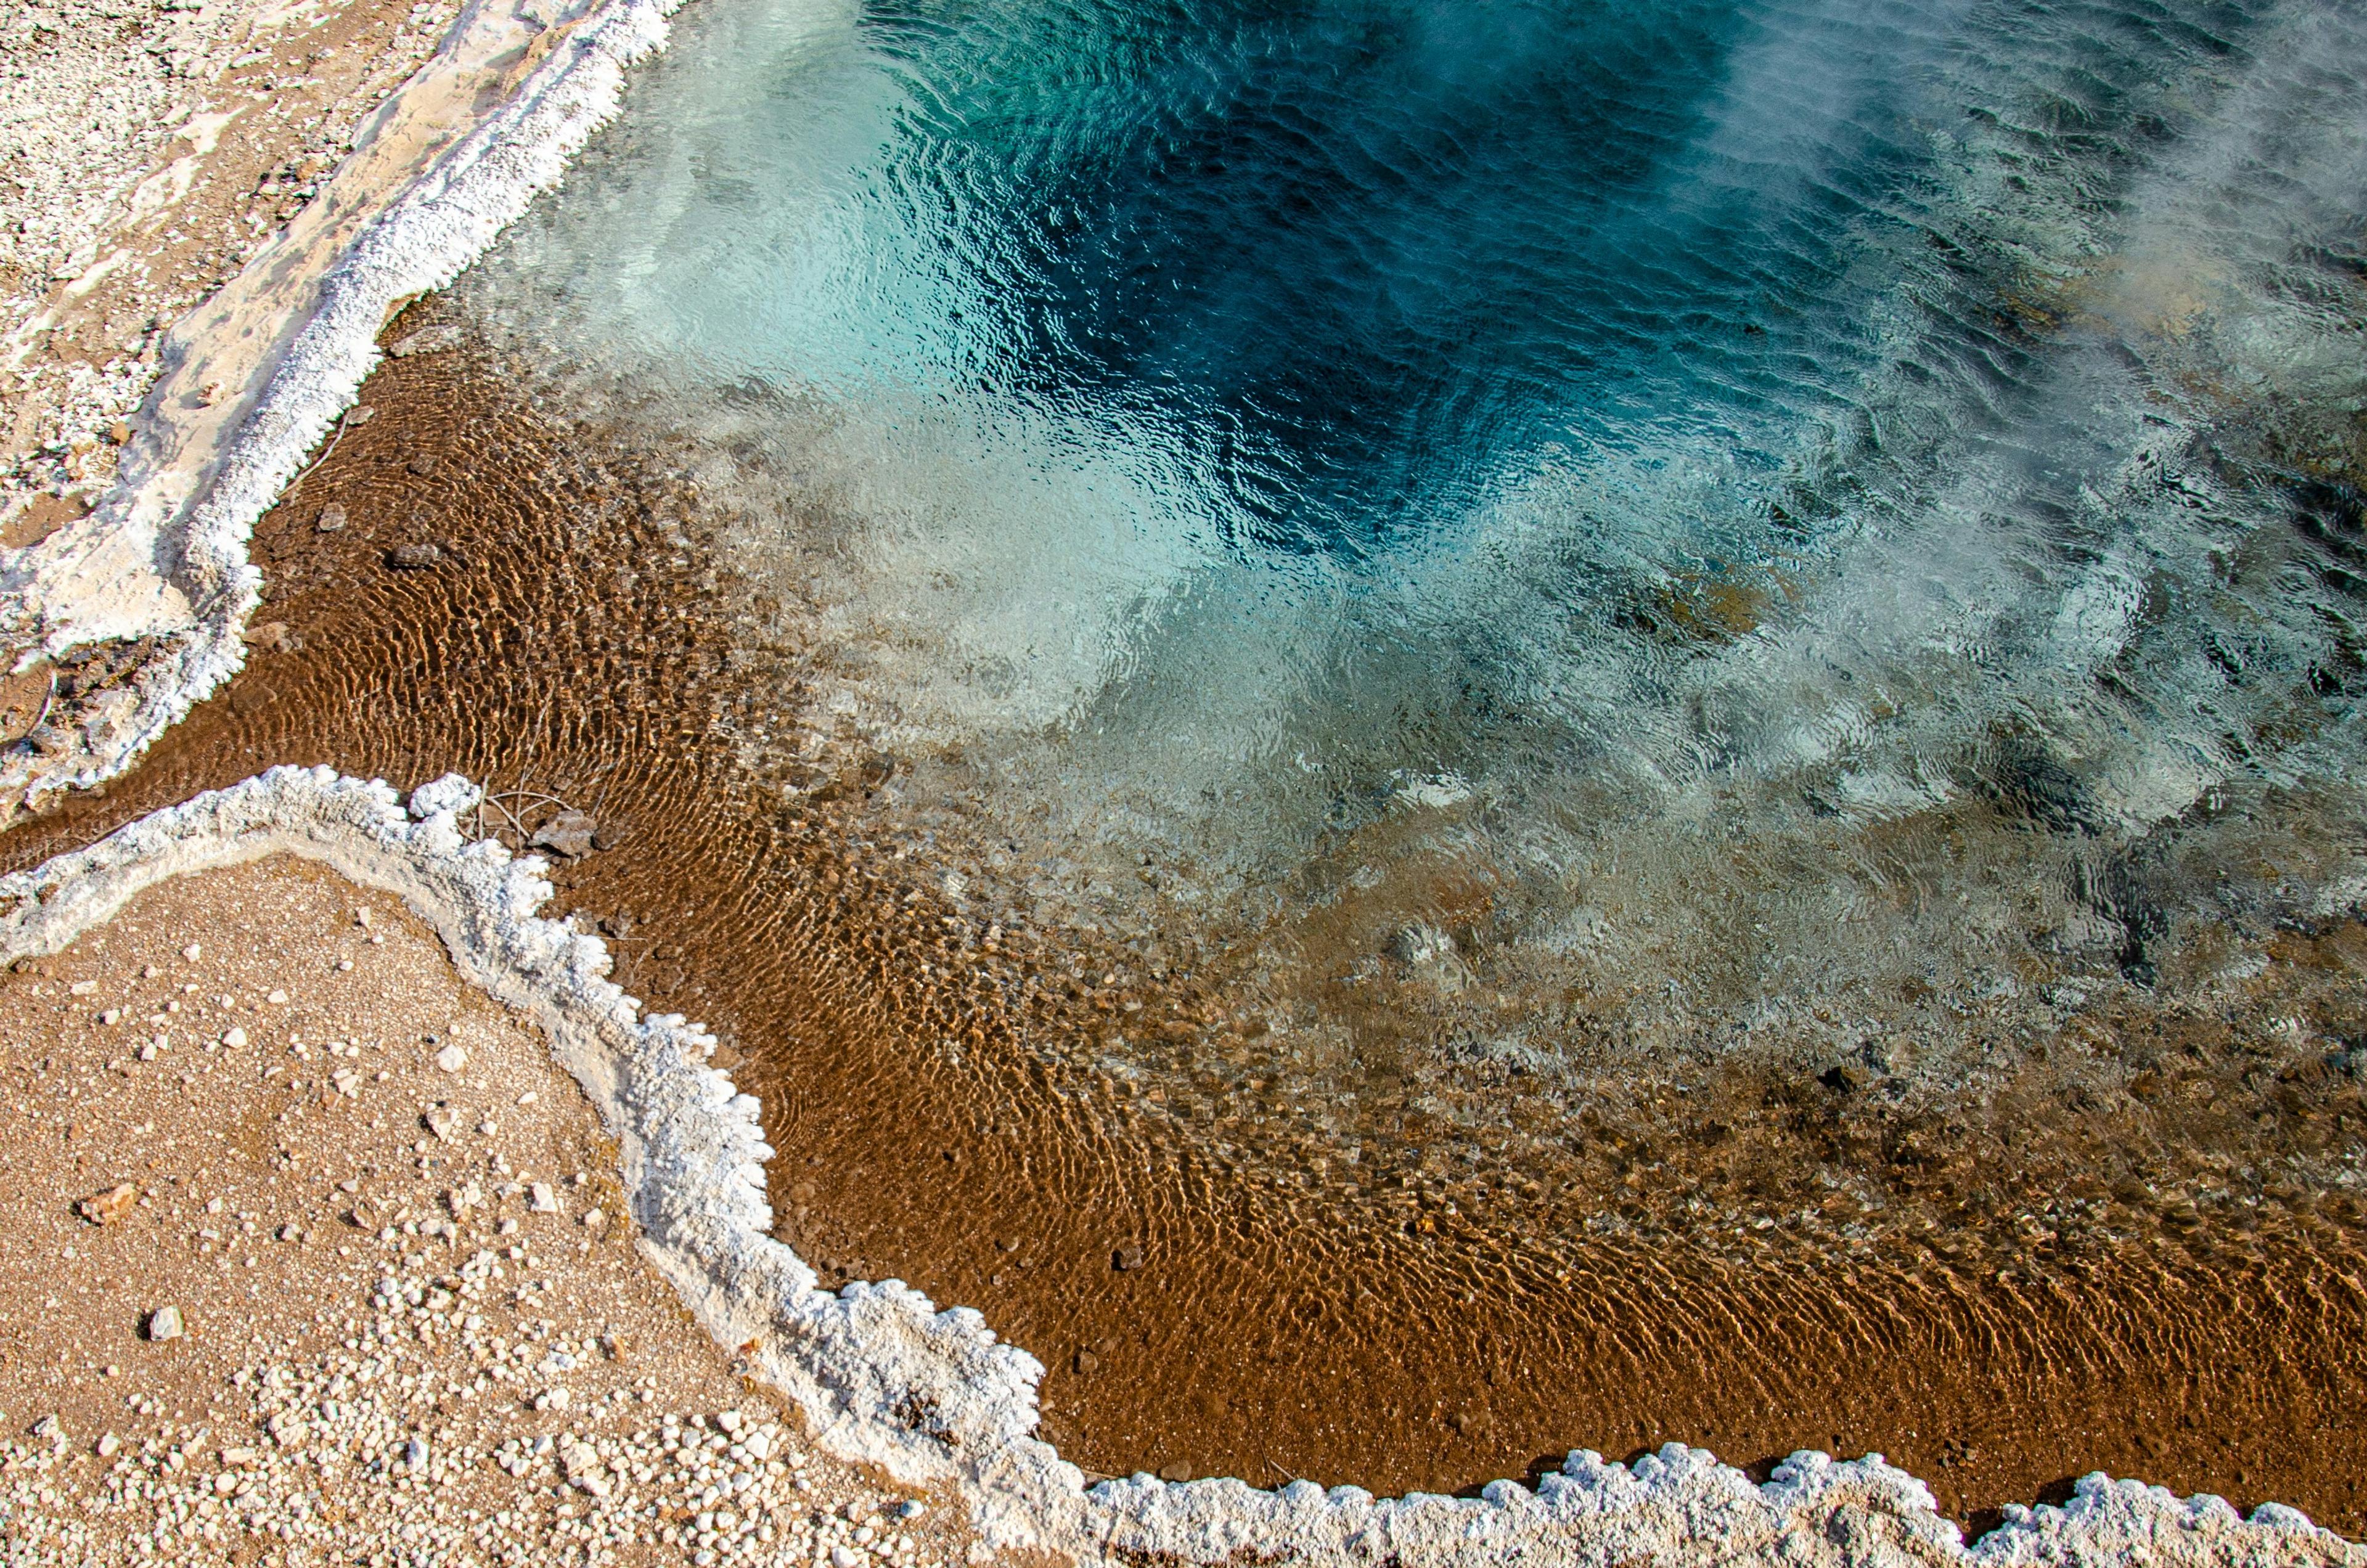 The photo depicts a close-up of a geothermal hot spring, showcasing the mesmerizing transition from the clear blue water at its center to the mineral-rich earthy tones and crystalline textures at its edges.